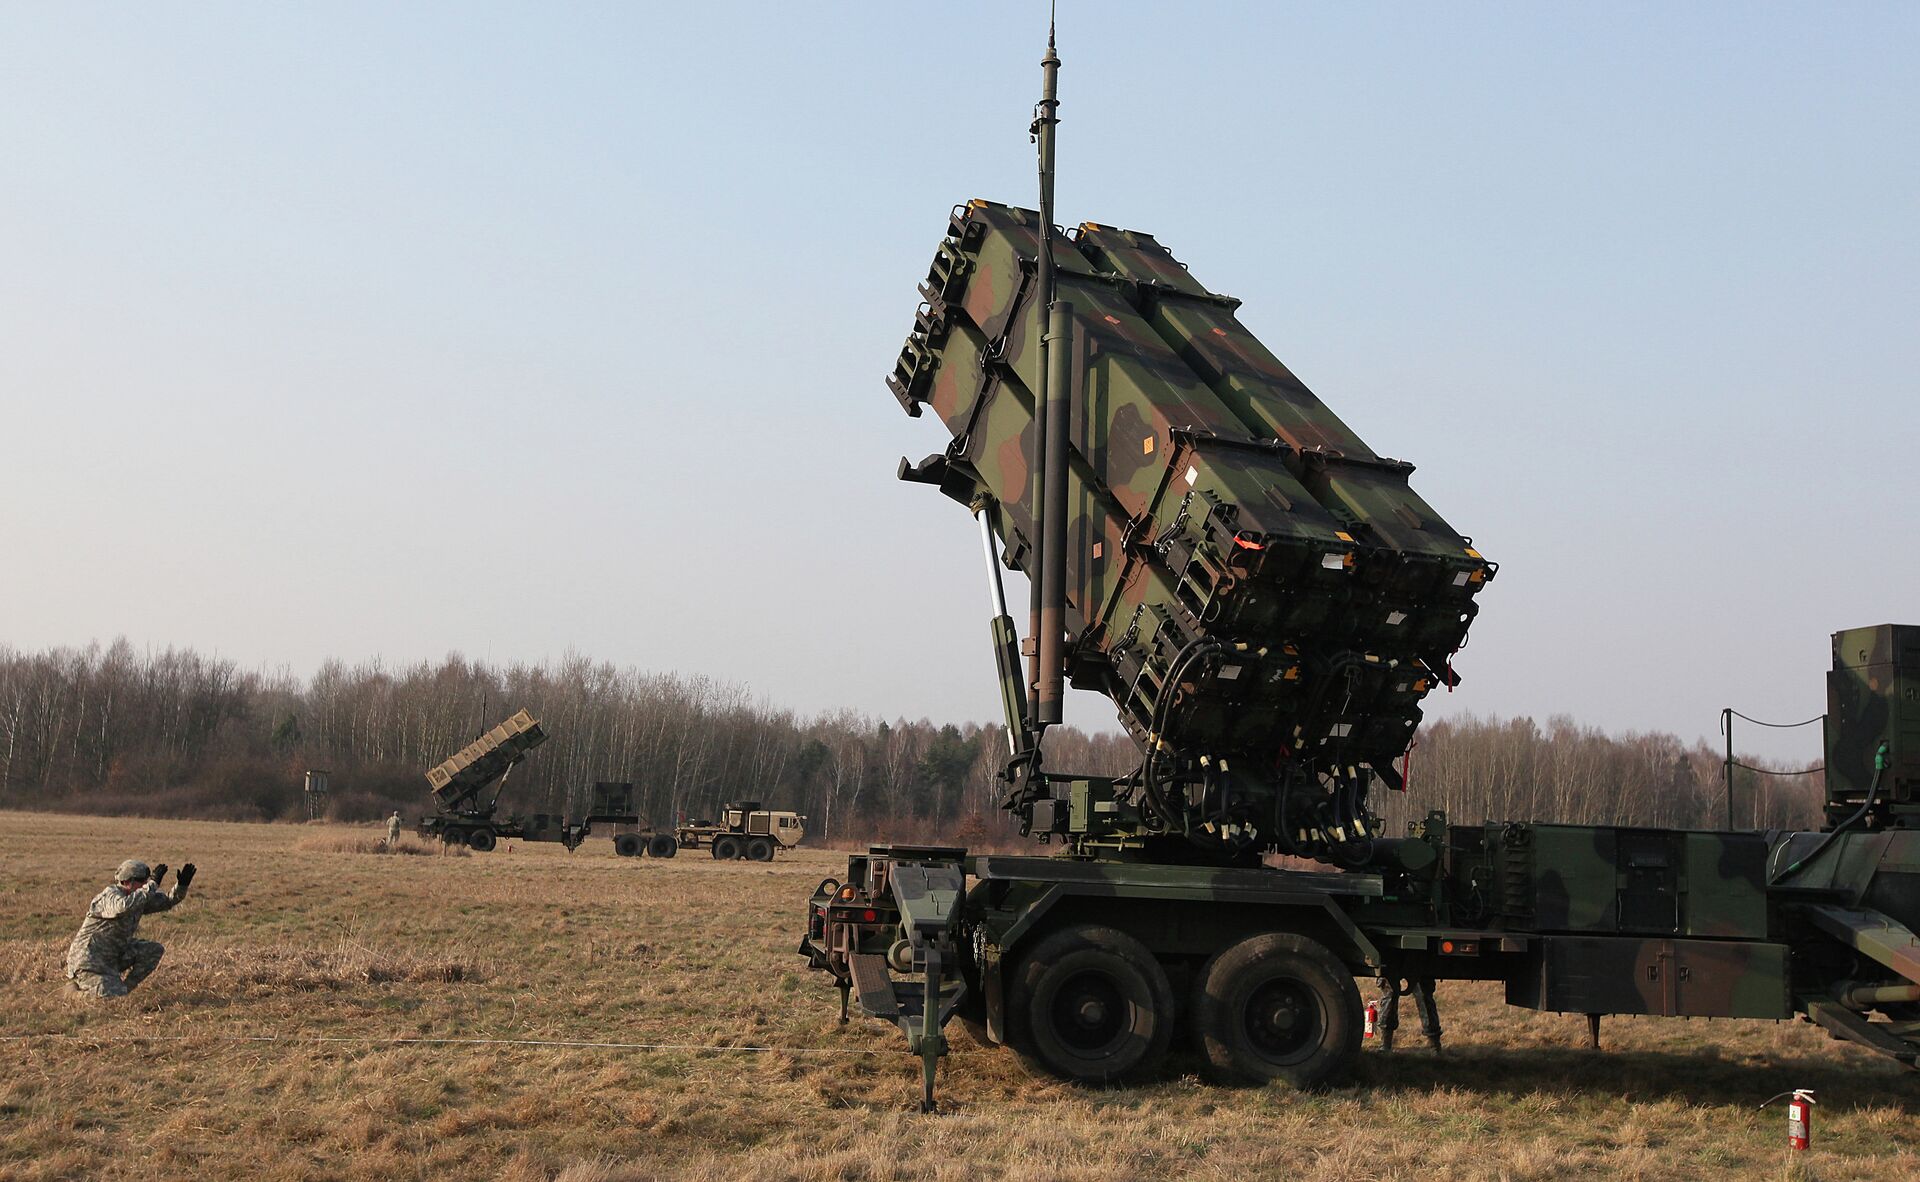 U.S. troops from 5th Battalion of the 7th Air Defense Regiment are seen at a test range in Sochaczew, Poland, on Saturday, March 21, 2015 - Sputnik International, 1920, 23.12.2021